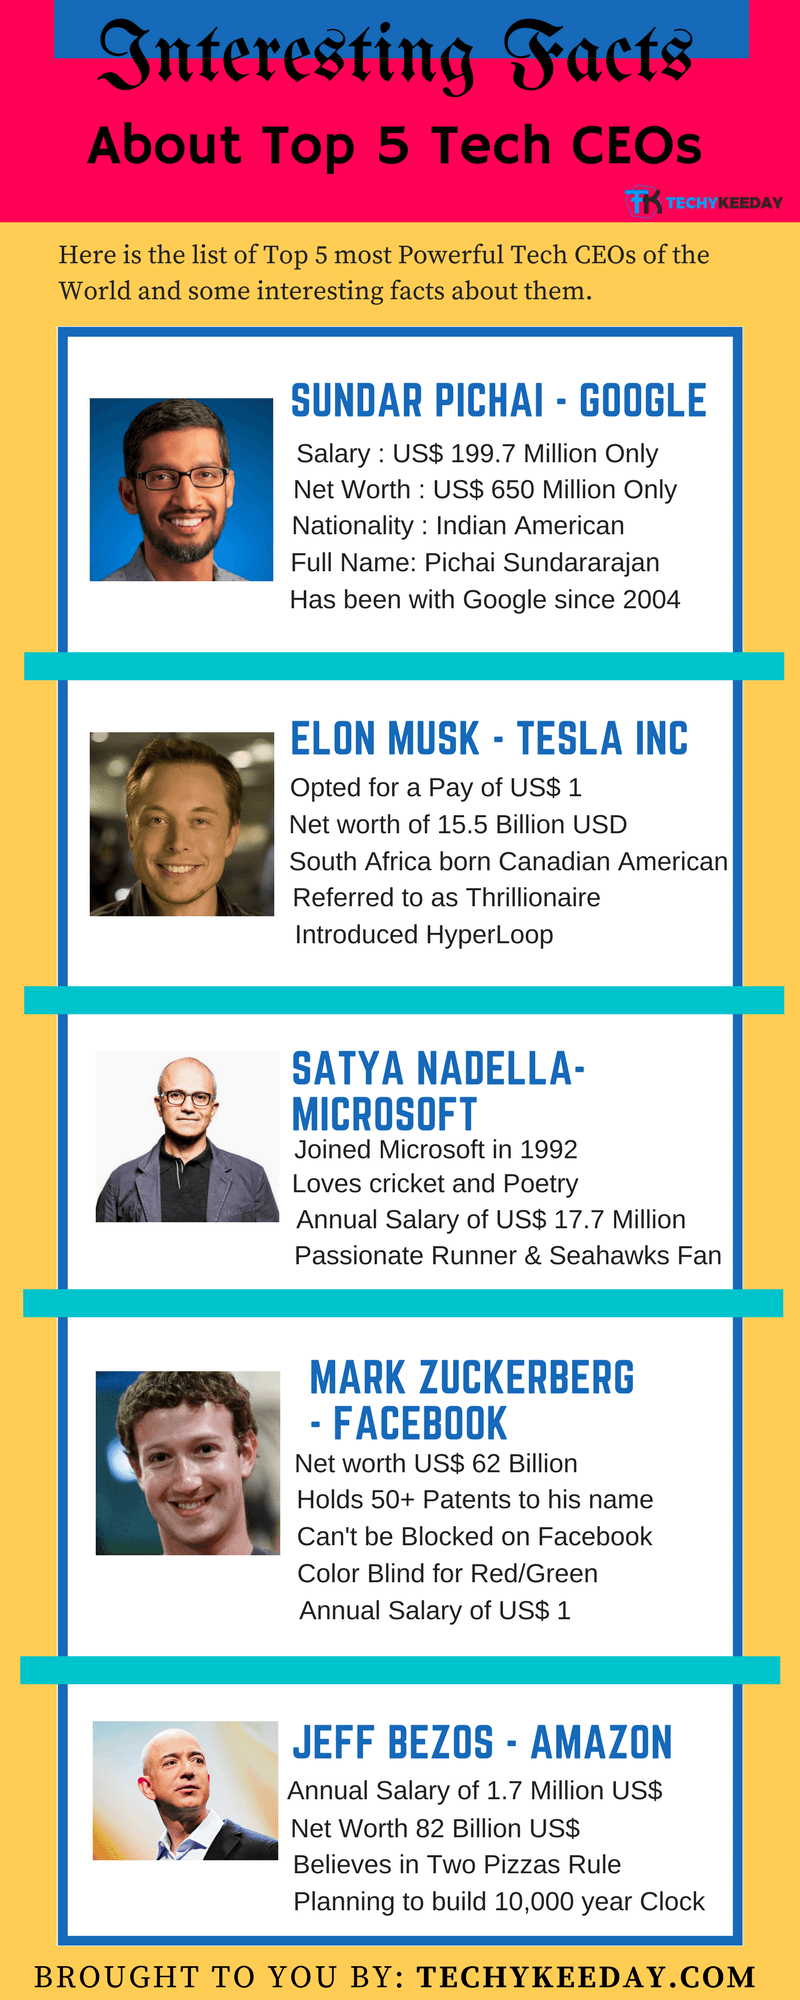 Top-5-Tech-CEOs-Interesting-Facts-about-them